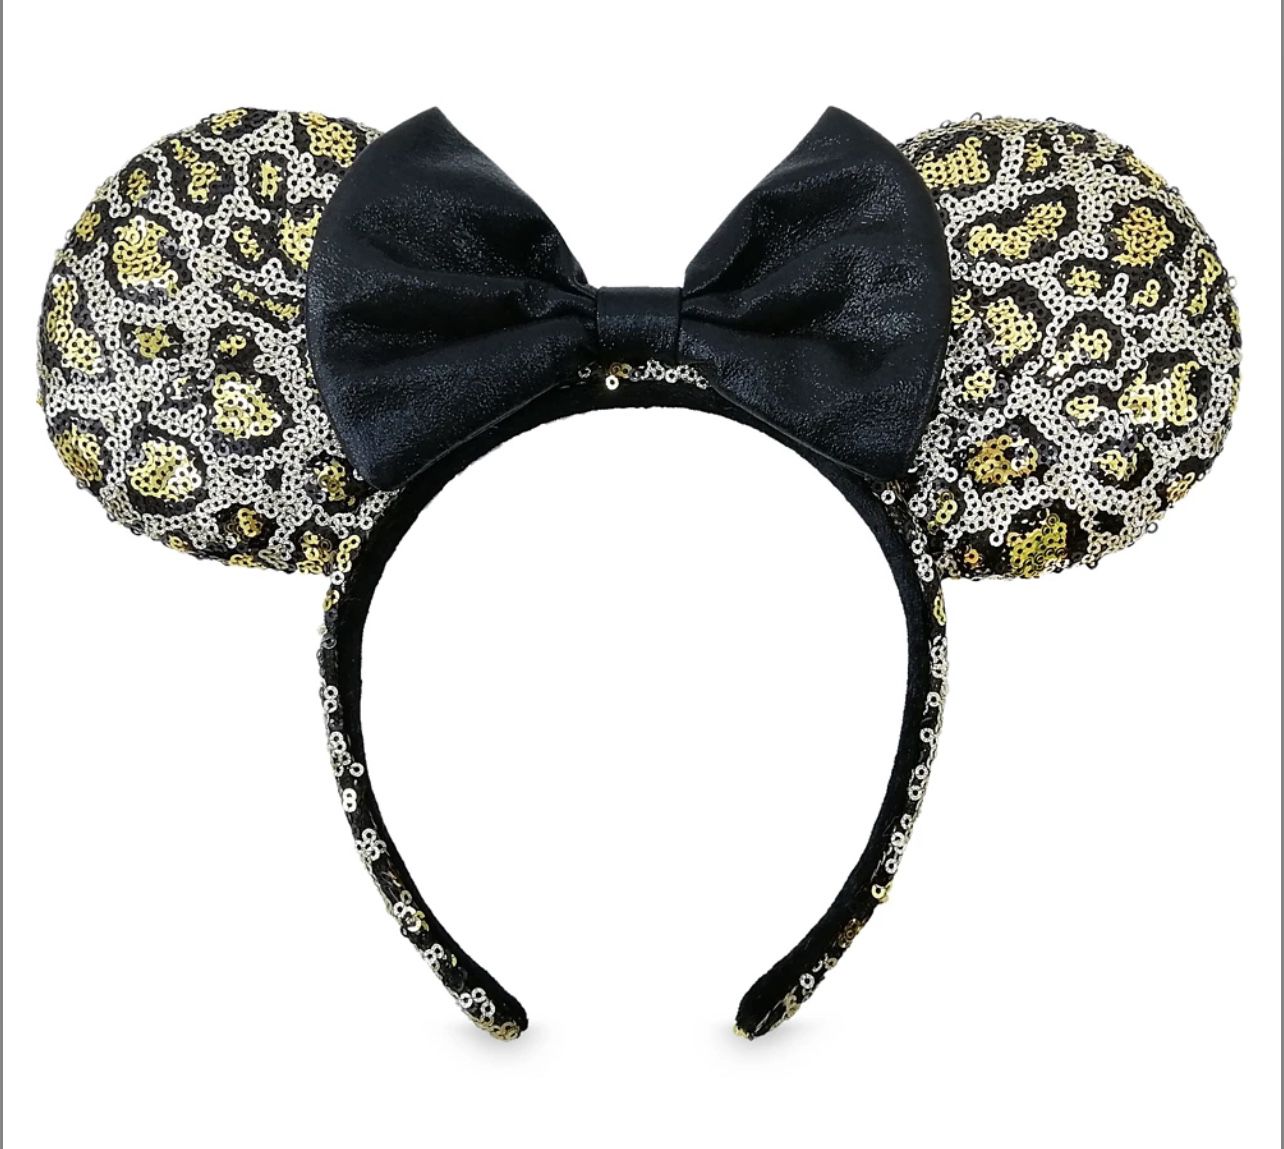 Minnie Mouse Sequined Leopard Print Ear Headband With Bow